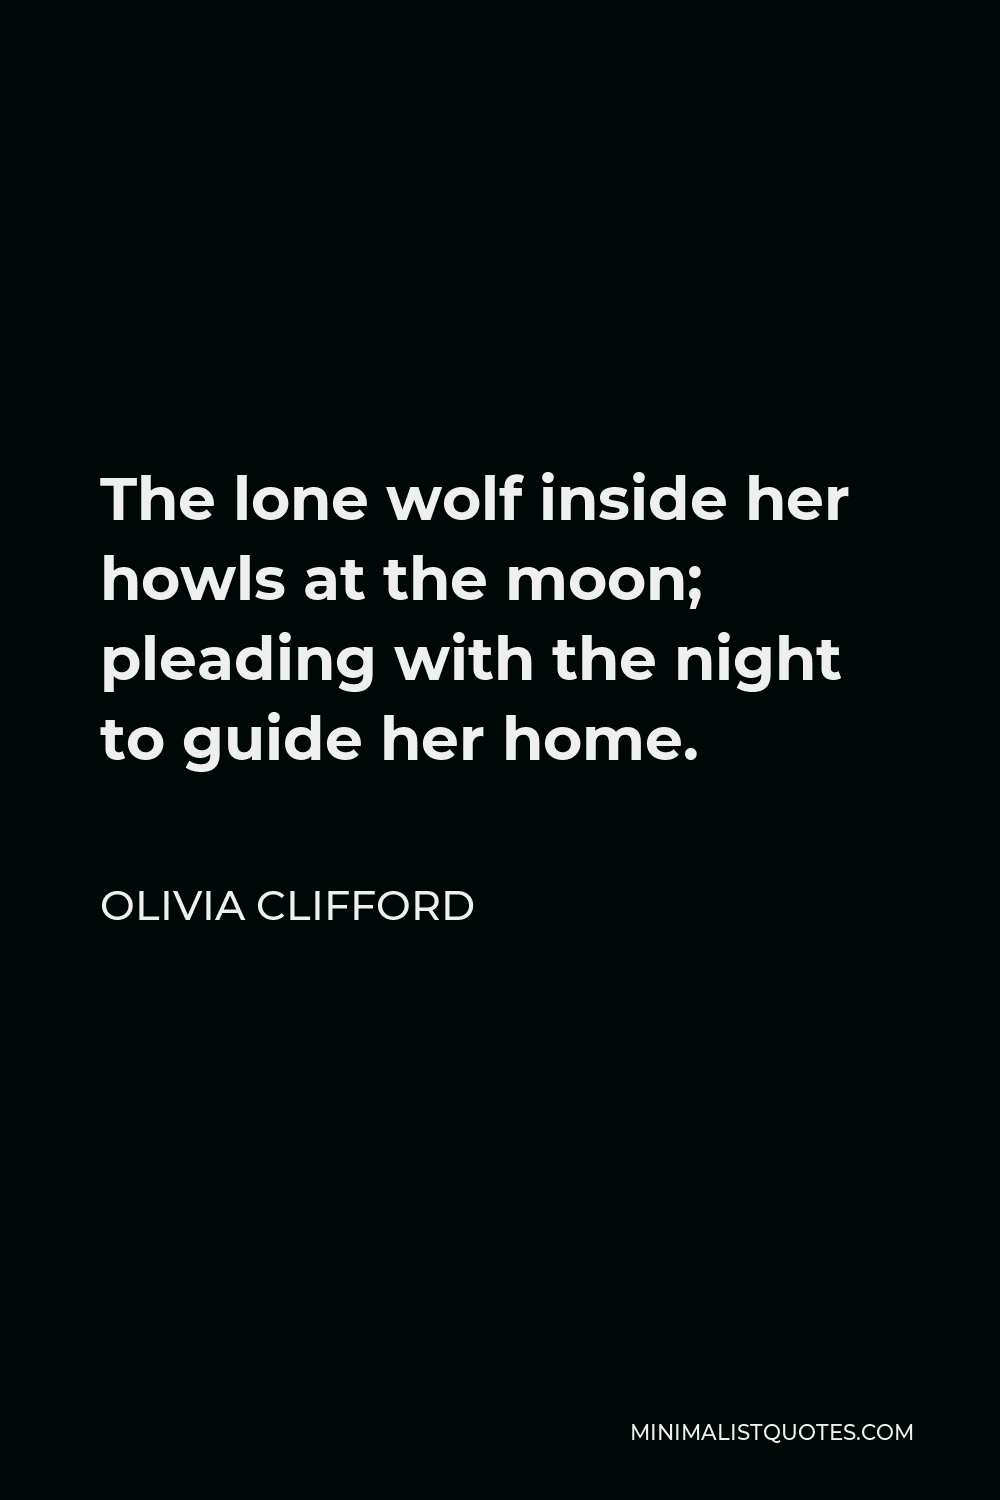 Olivia Clifford Quote The Lone Wolf Inside Her Howls At The Moon